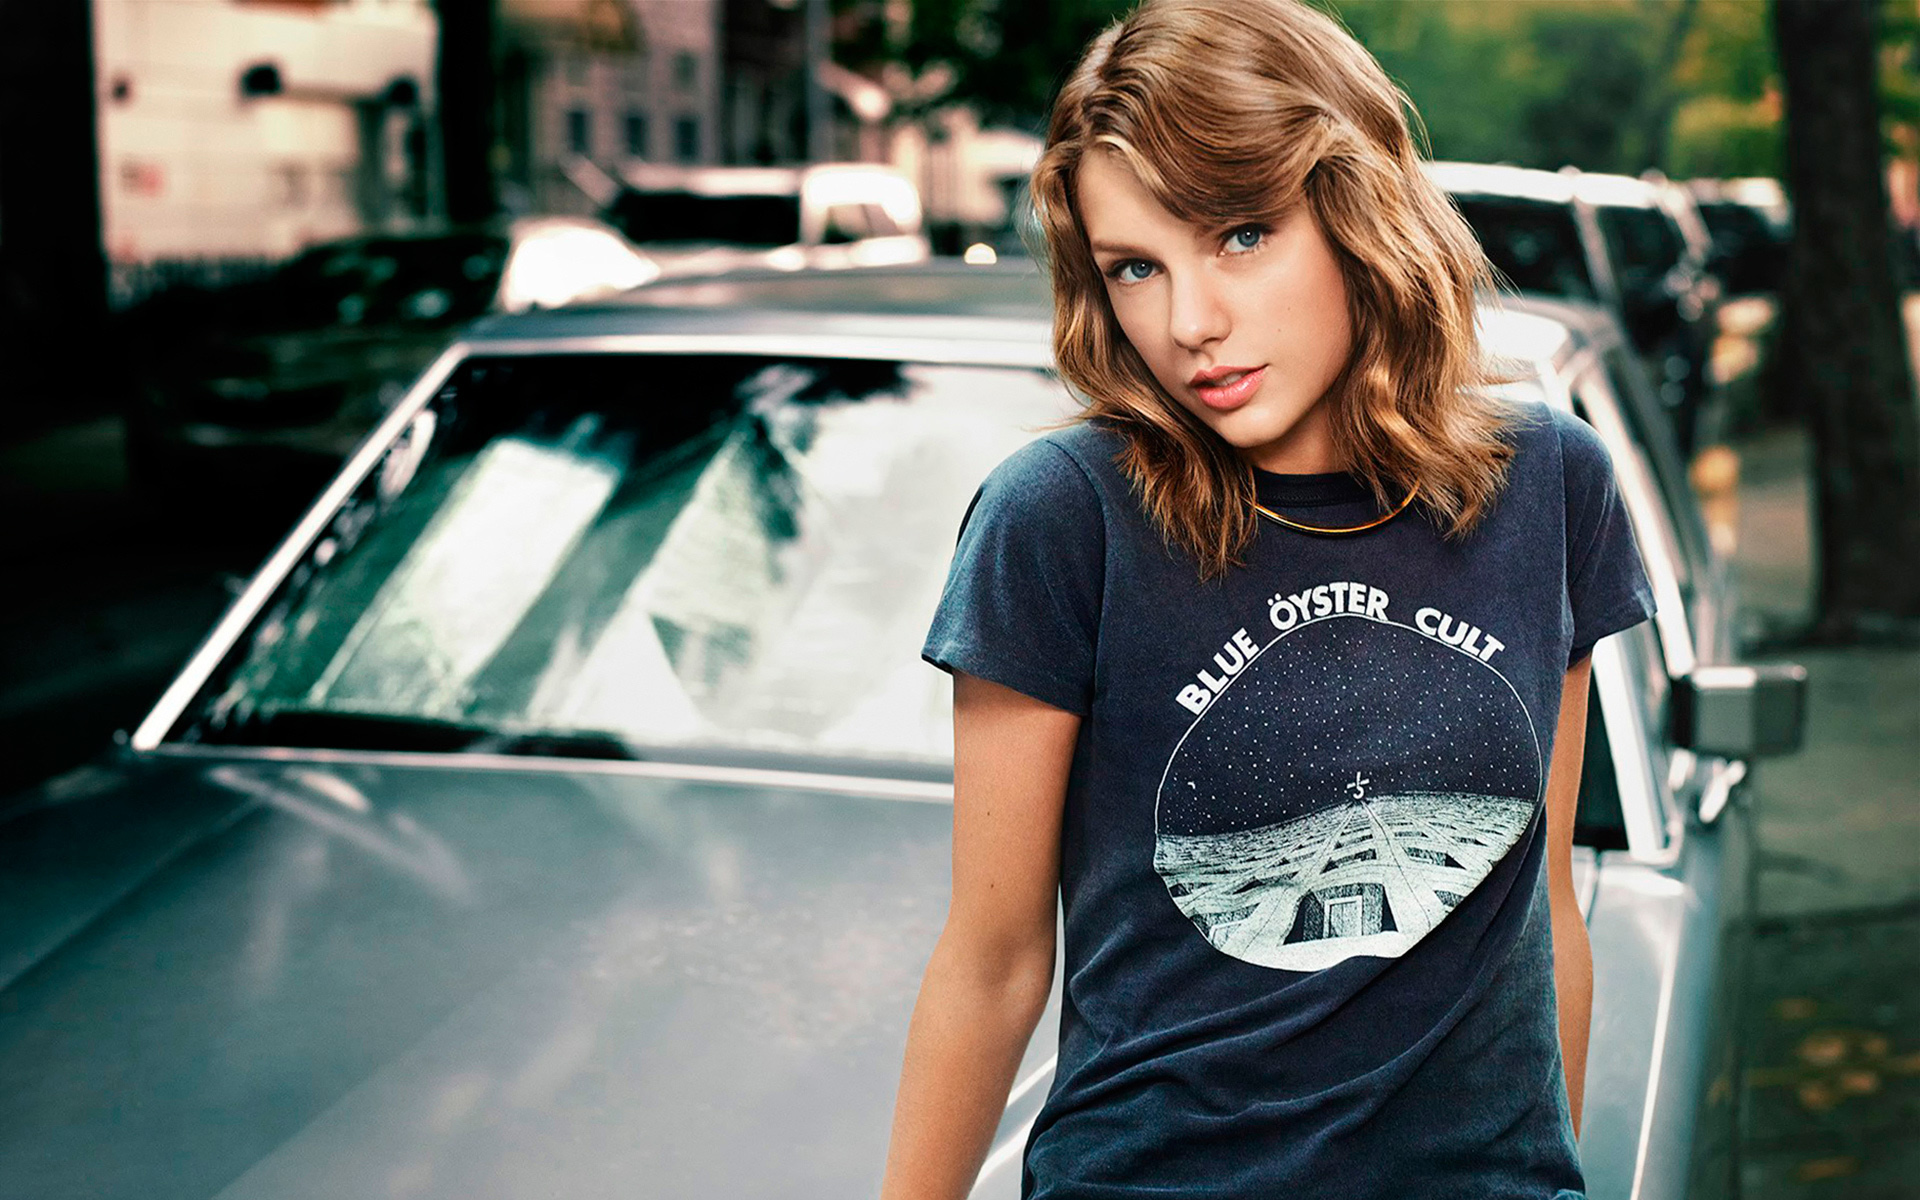 Taylor Swift in the background of a car